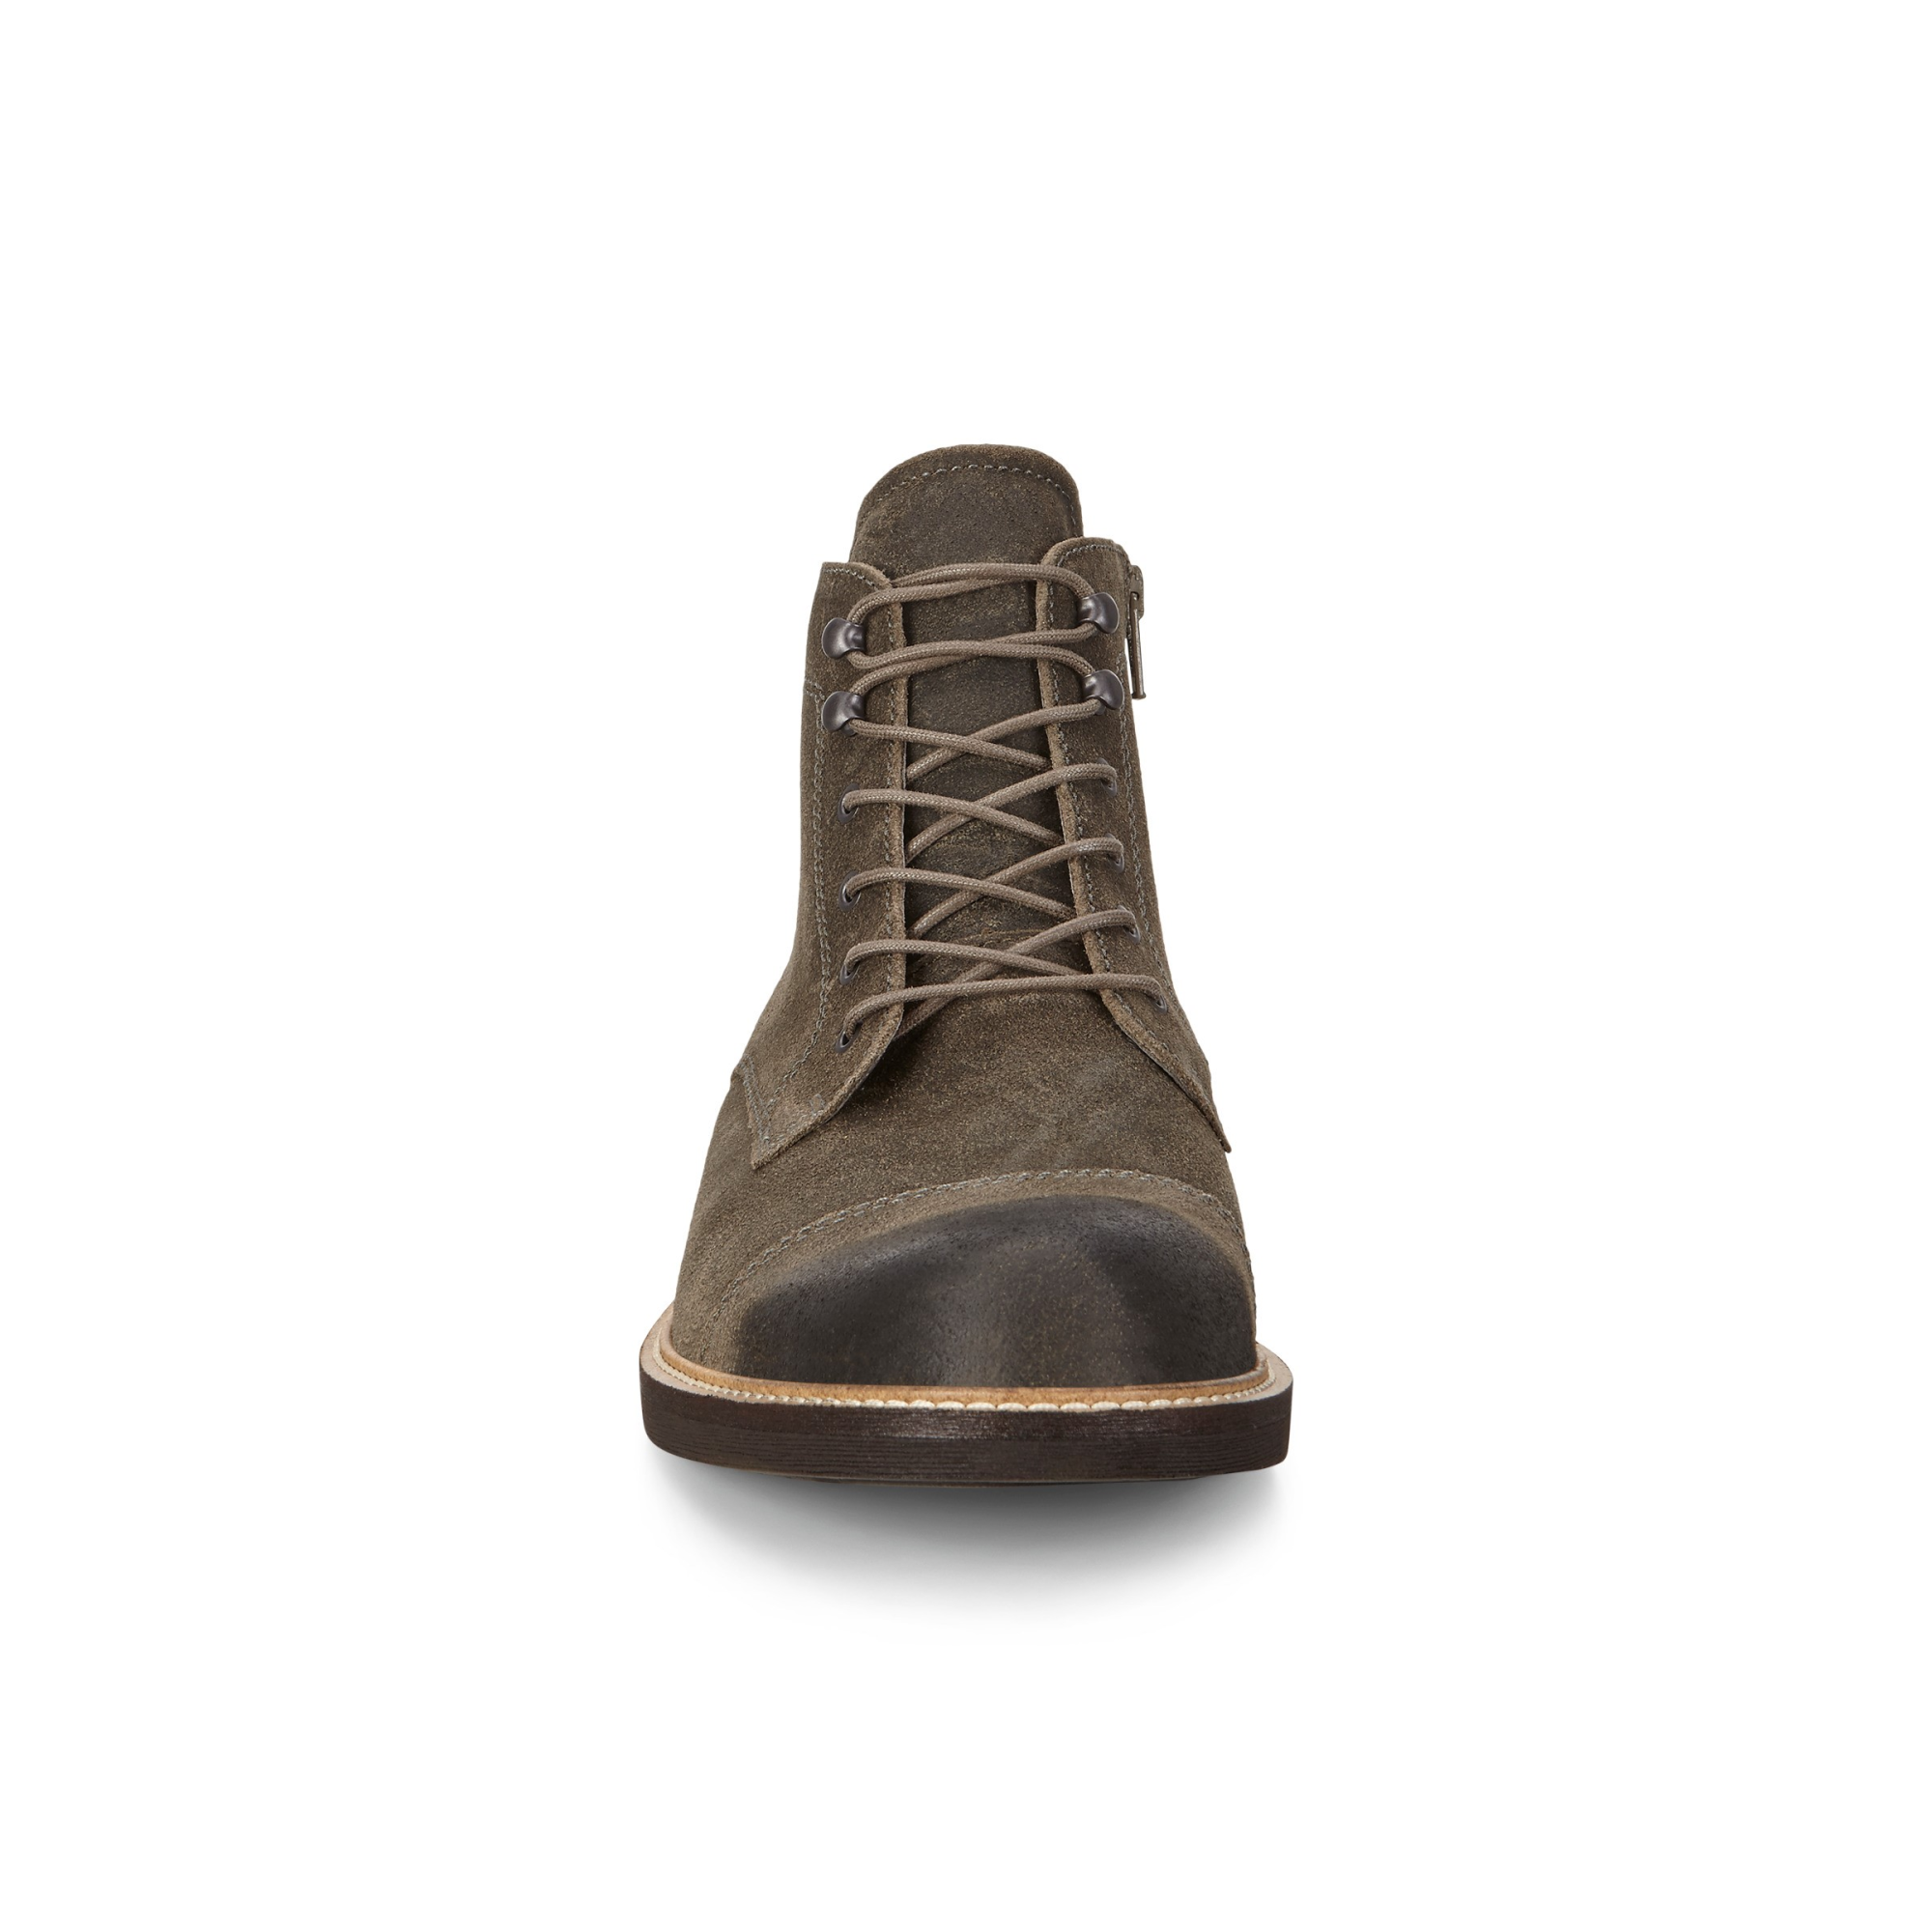 Ecco Kenton Vintage Boot 43 - Products - Veryk Mall - Veryk many product, quick response, safe your money!